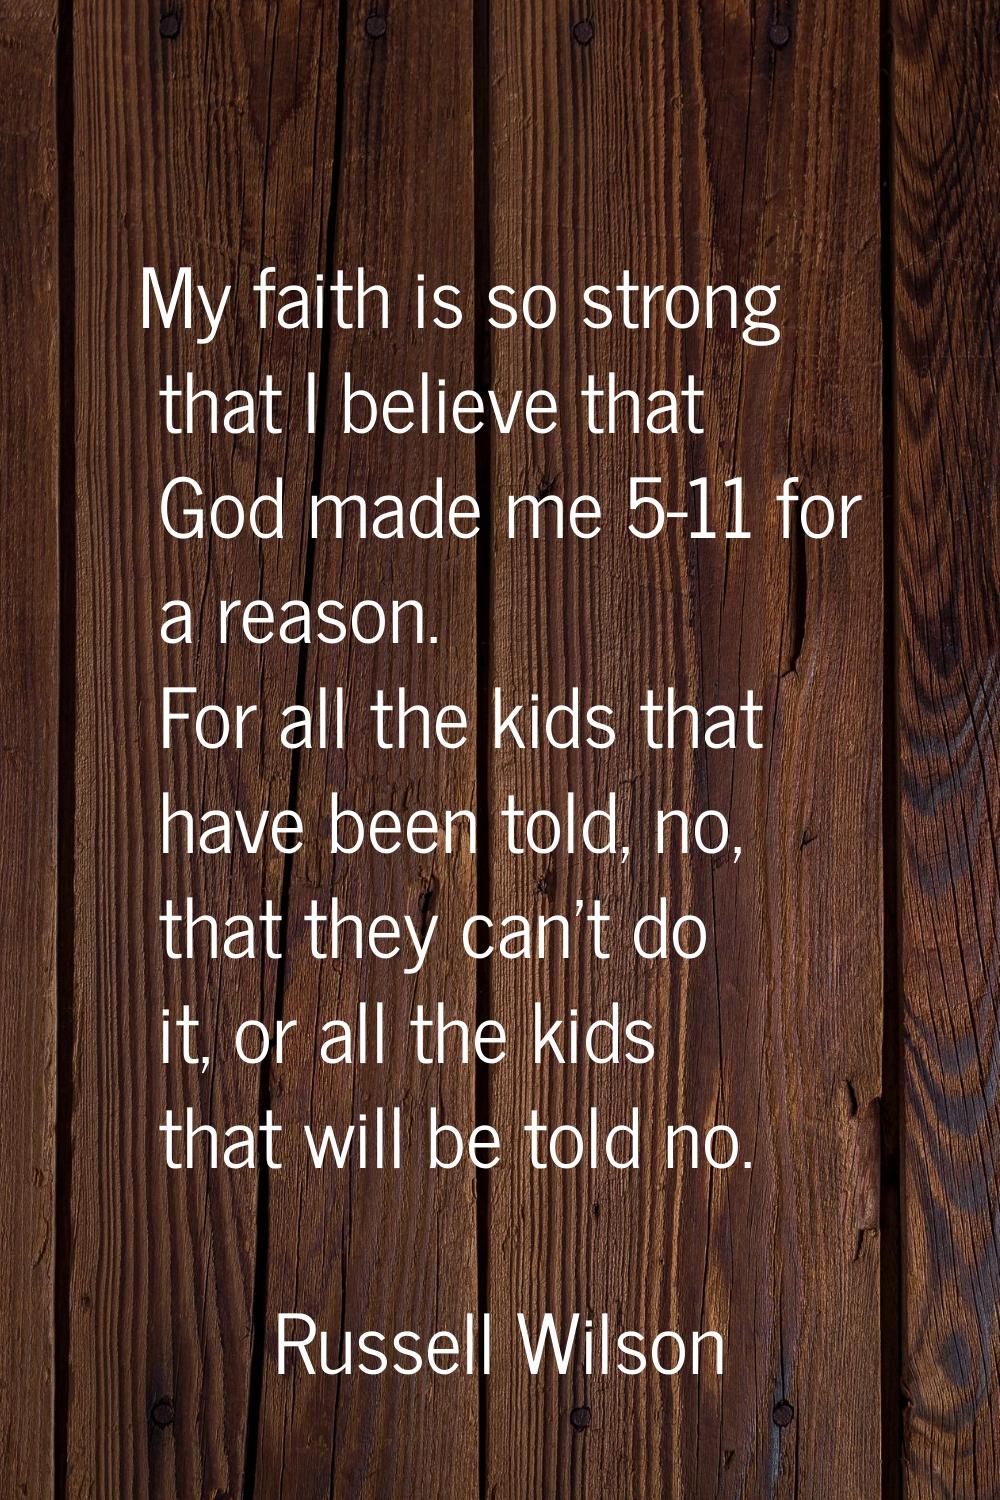 My faith is so strong that I believe that God made me 5-11 for a reason. For all the kids that have